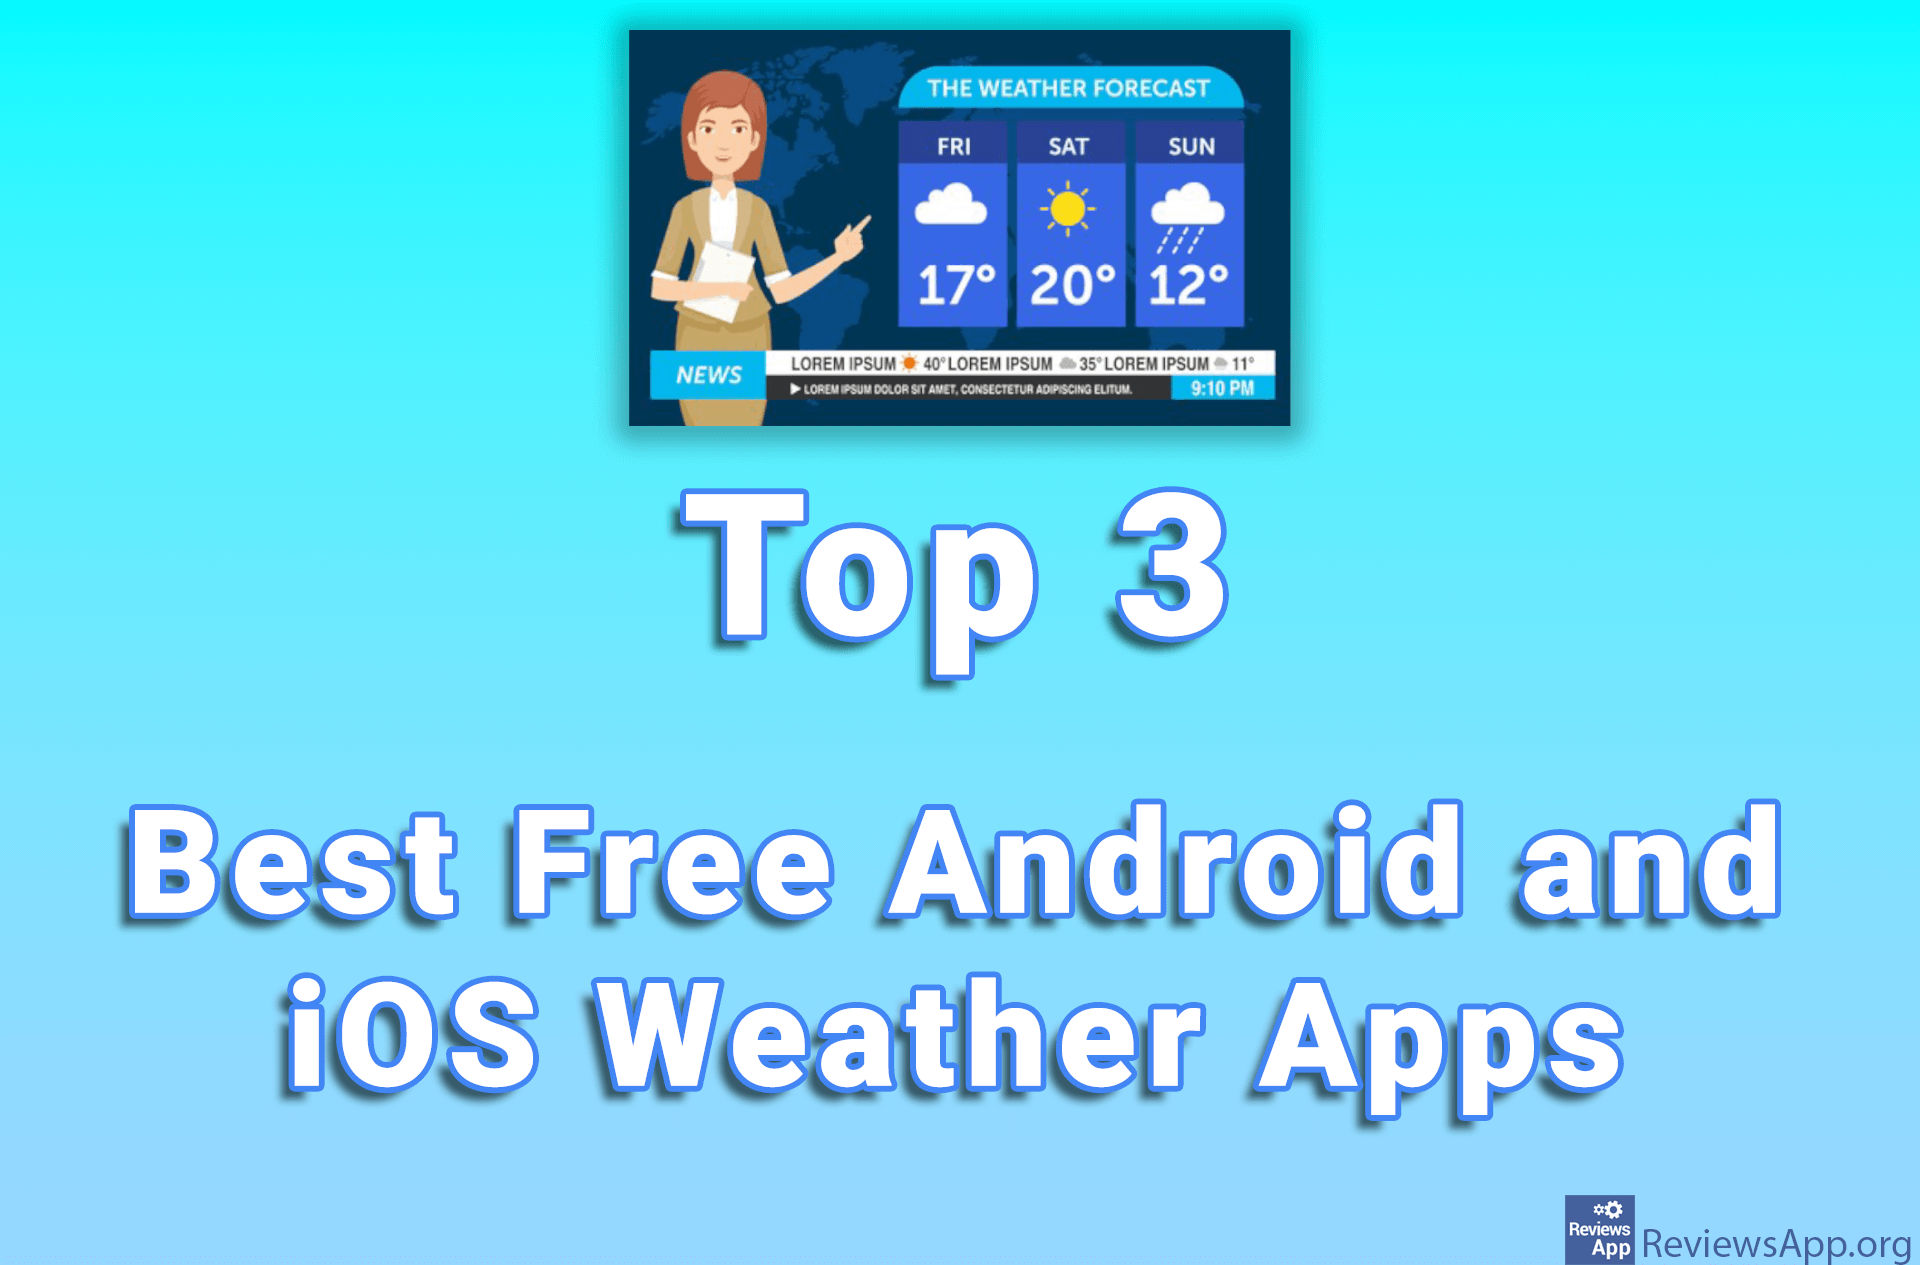 Top 3 Best Free Android and iOS Weather Apps